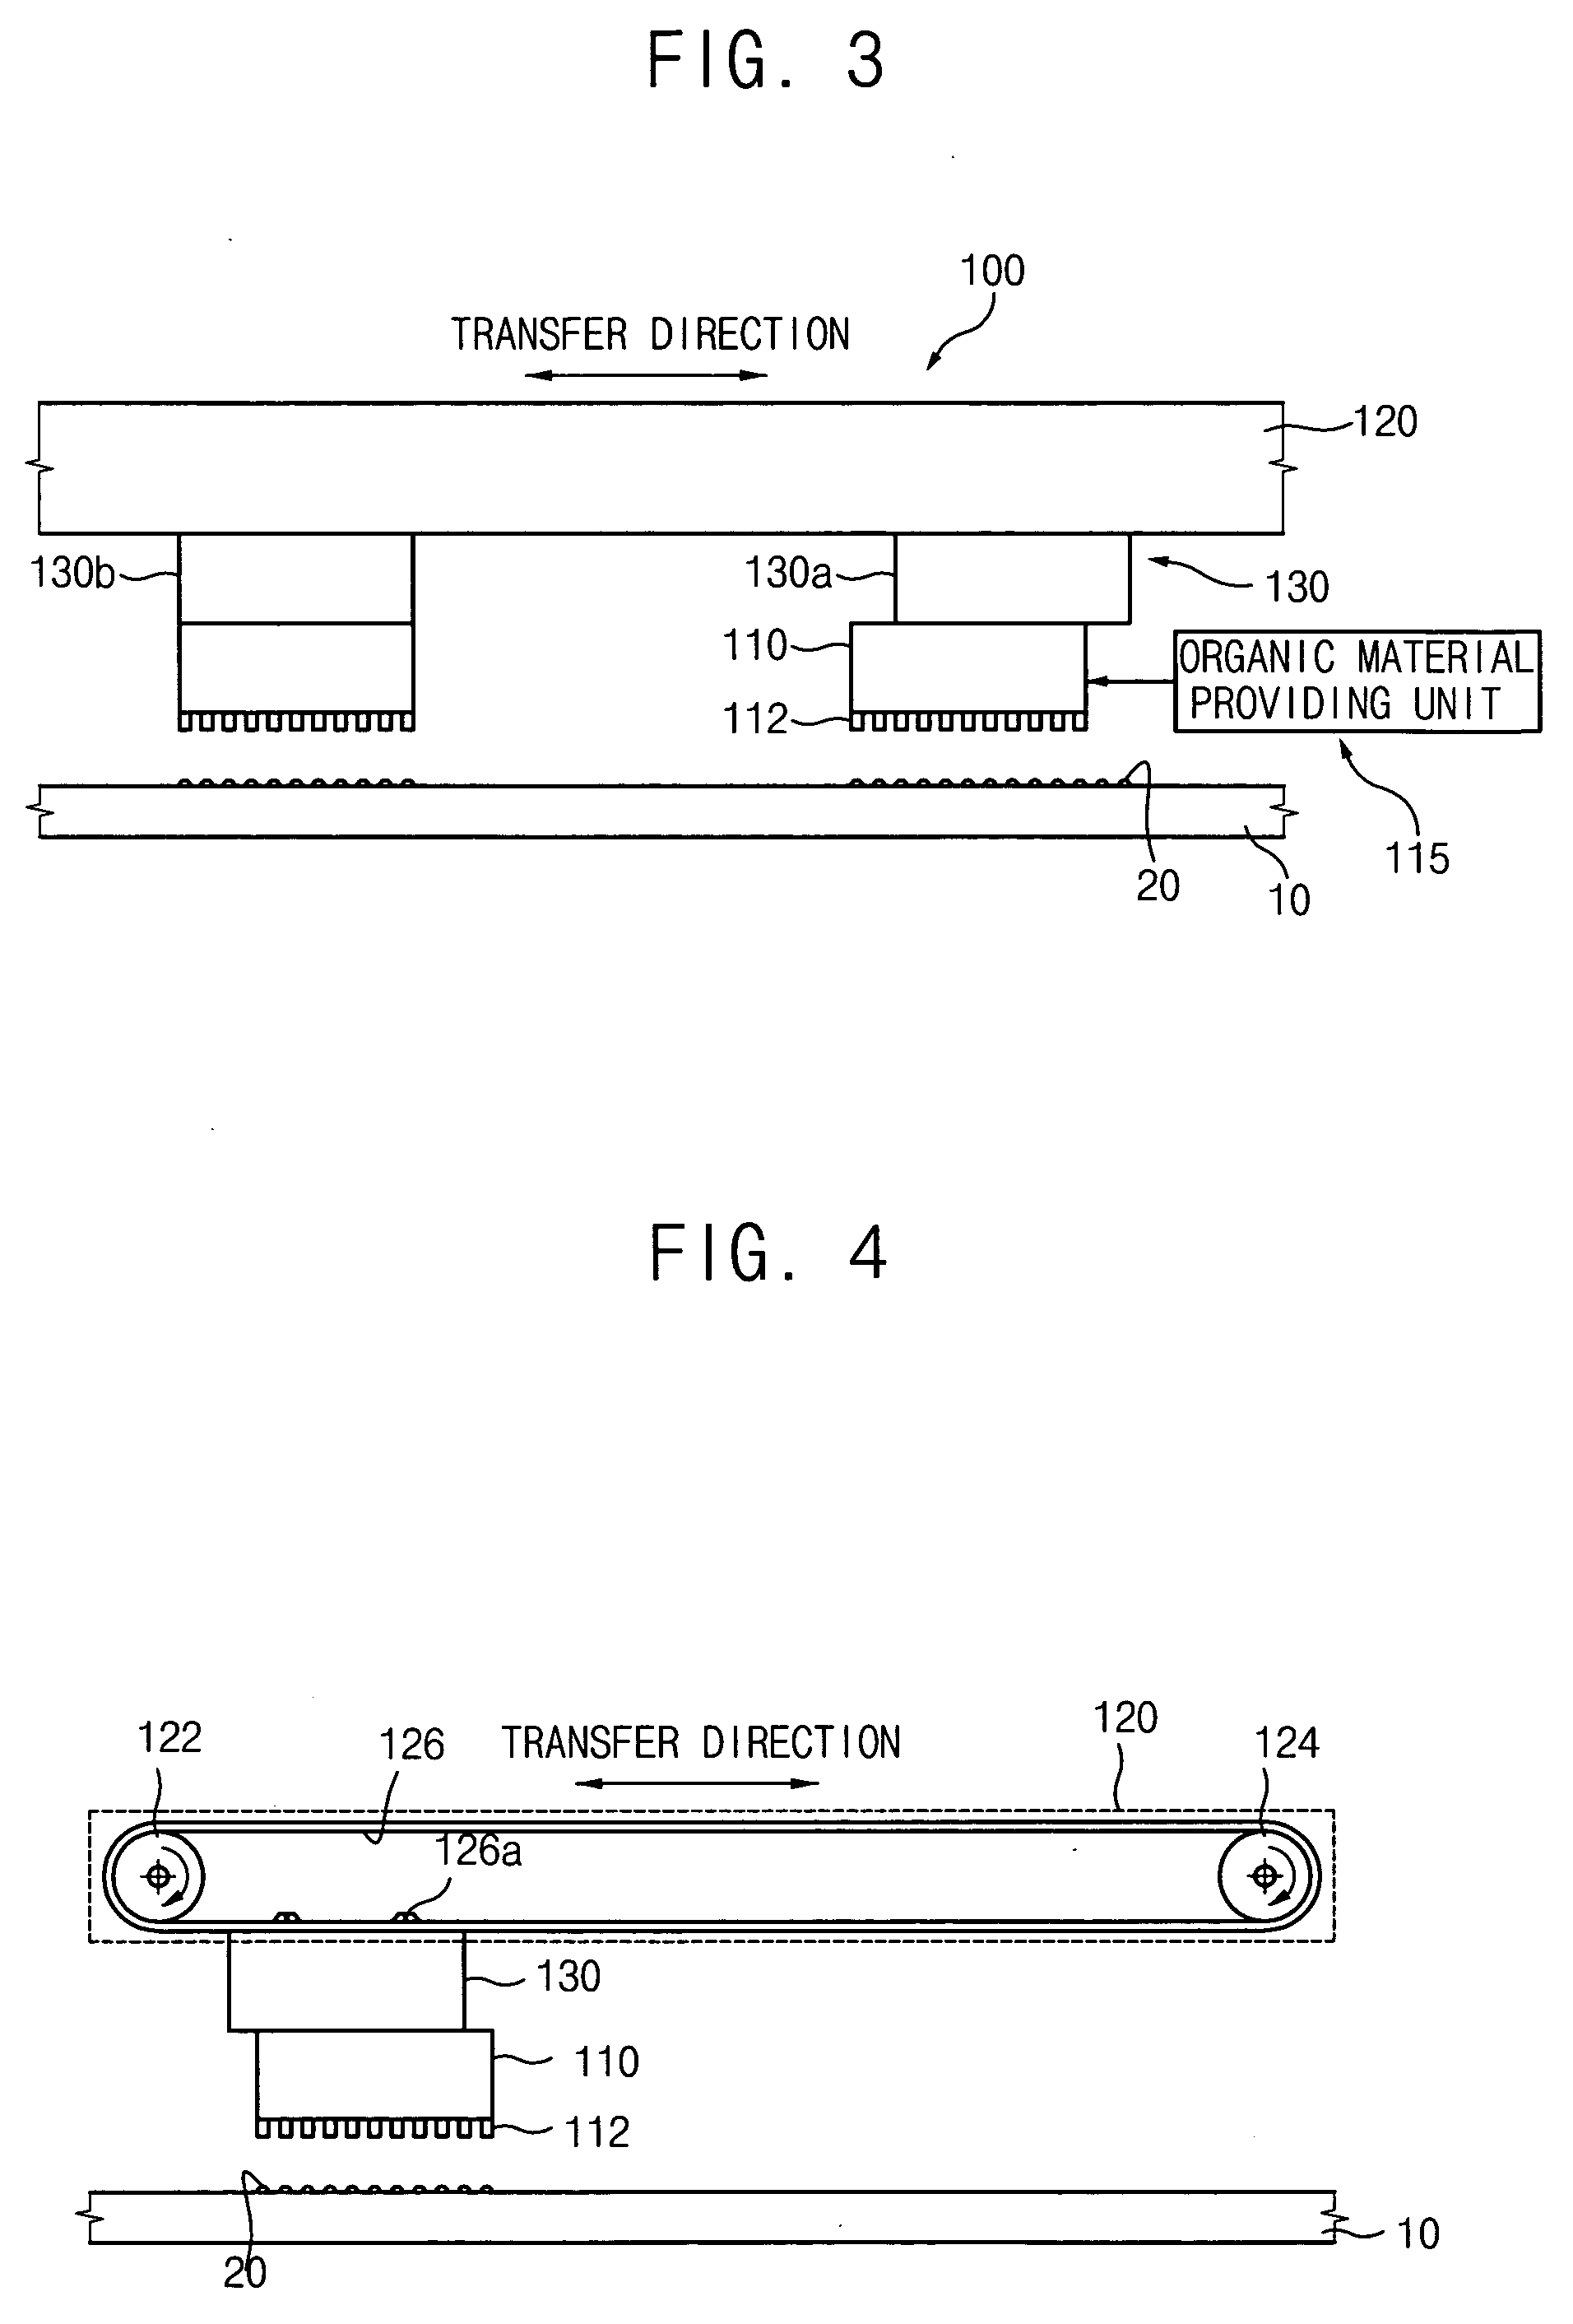 Apparatus for depositing an organic material on a substrate